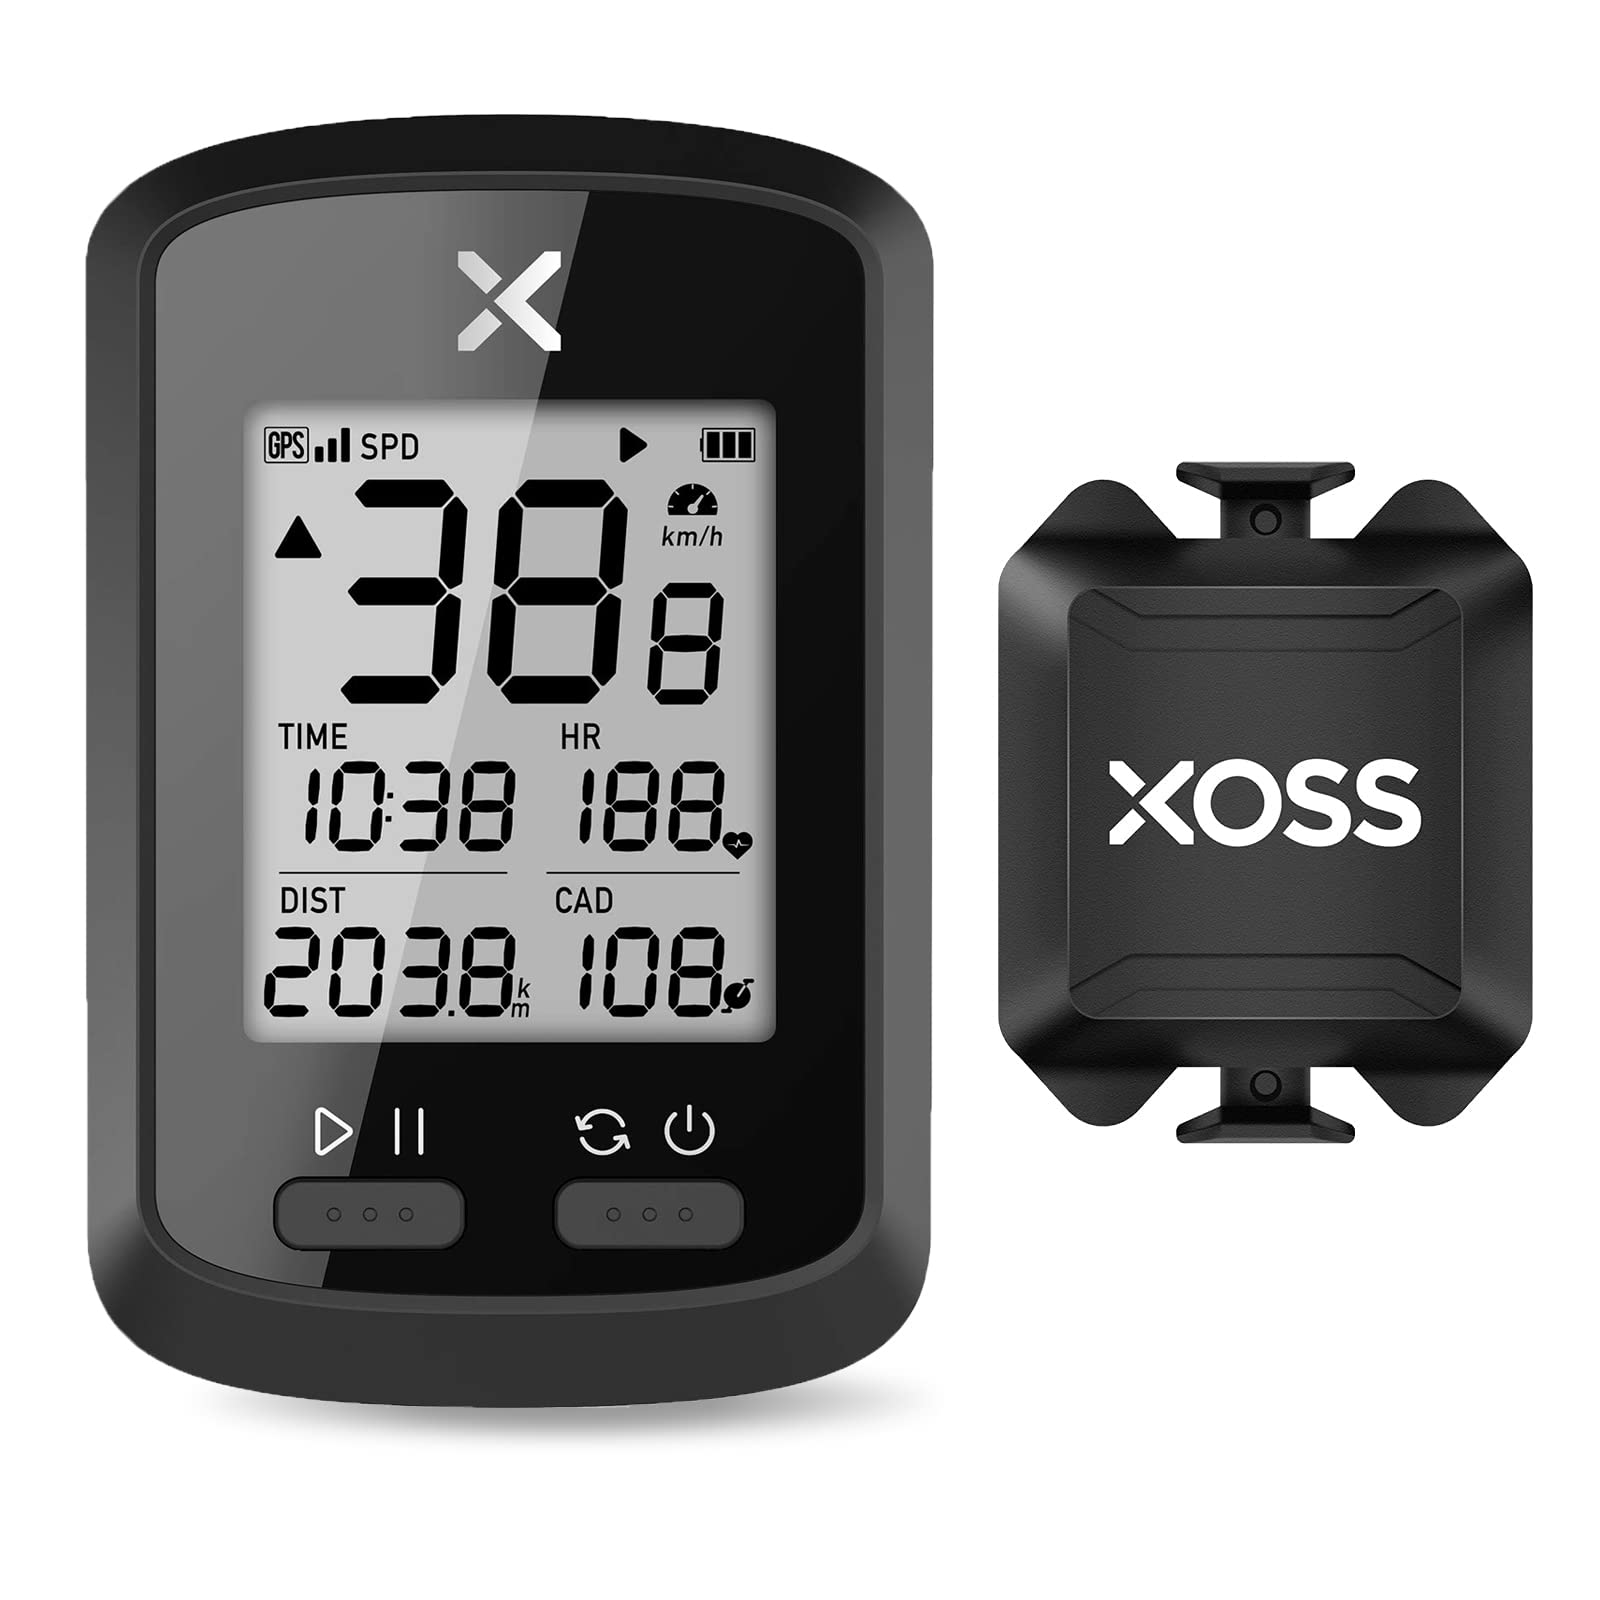 2022 Wireless Bike Computer, G+ GPS Speedometer Support Strava and Trainingpeaks, IPX7 Waterproof Bicycle ANT+ with Cadence Cycling Computers